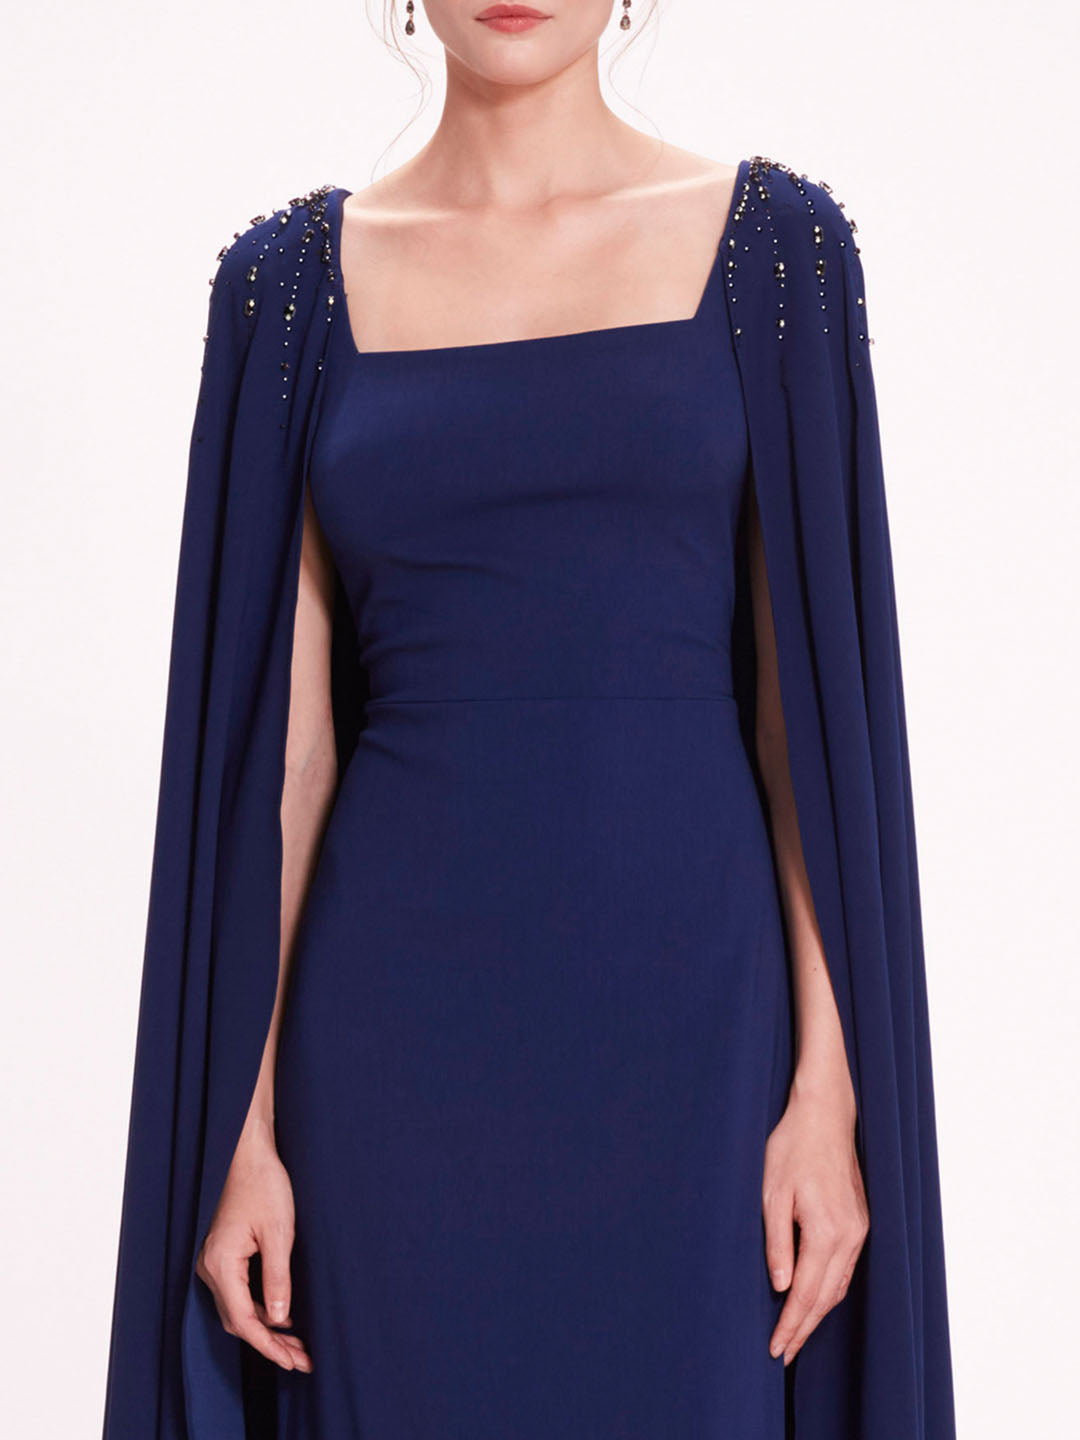 Embellished Cape Gown | Marchesa